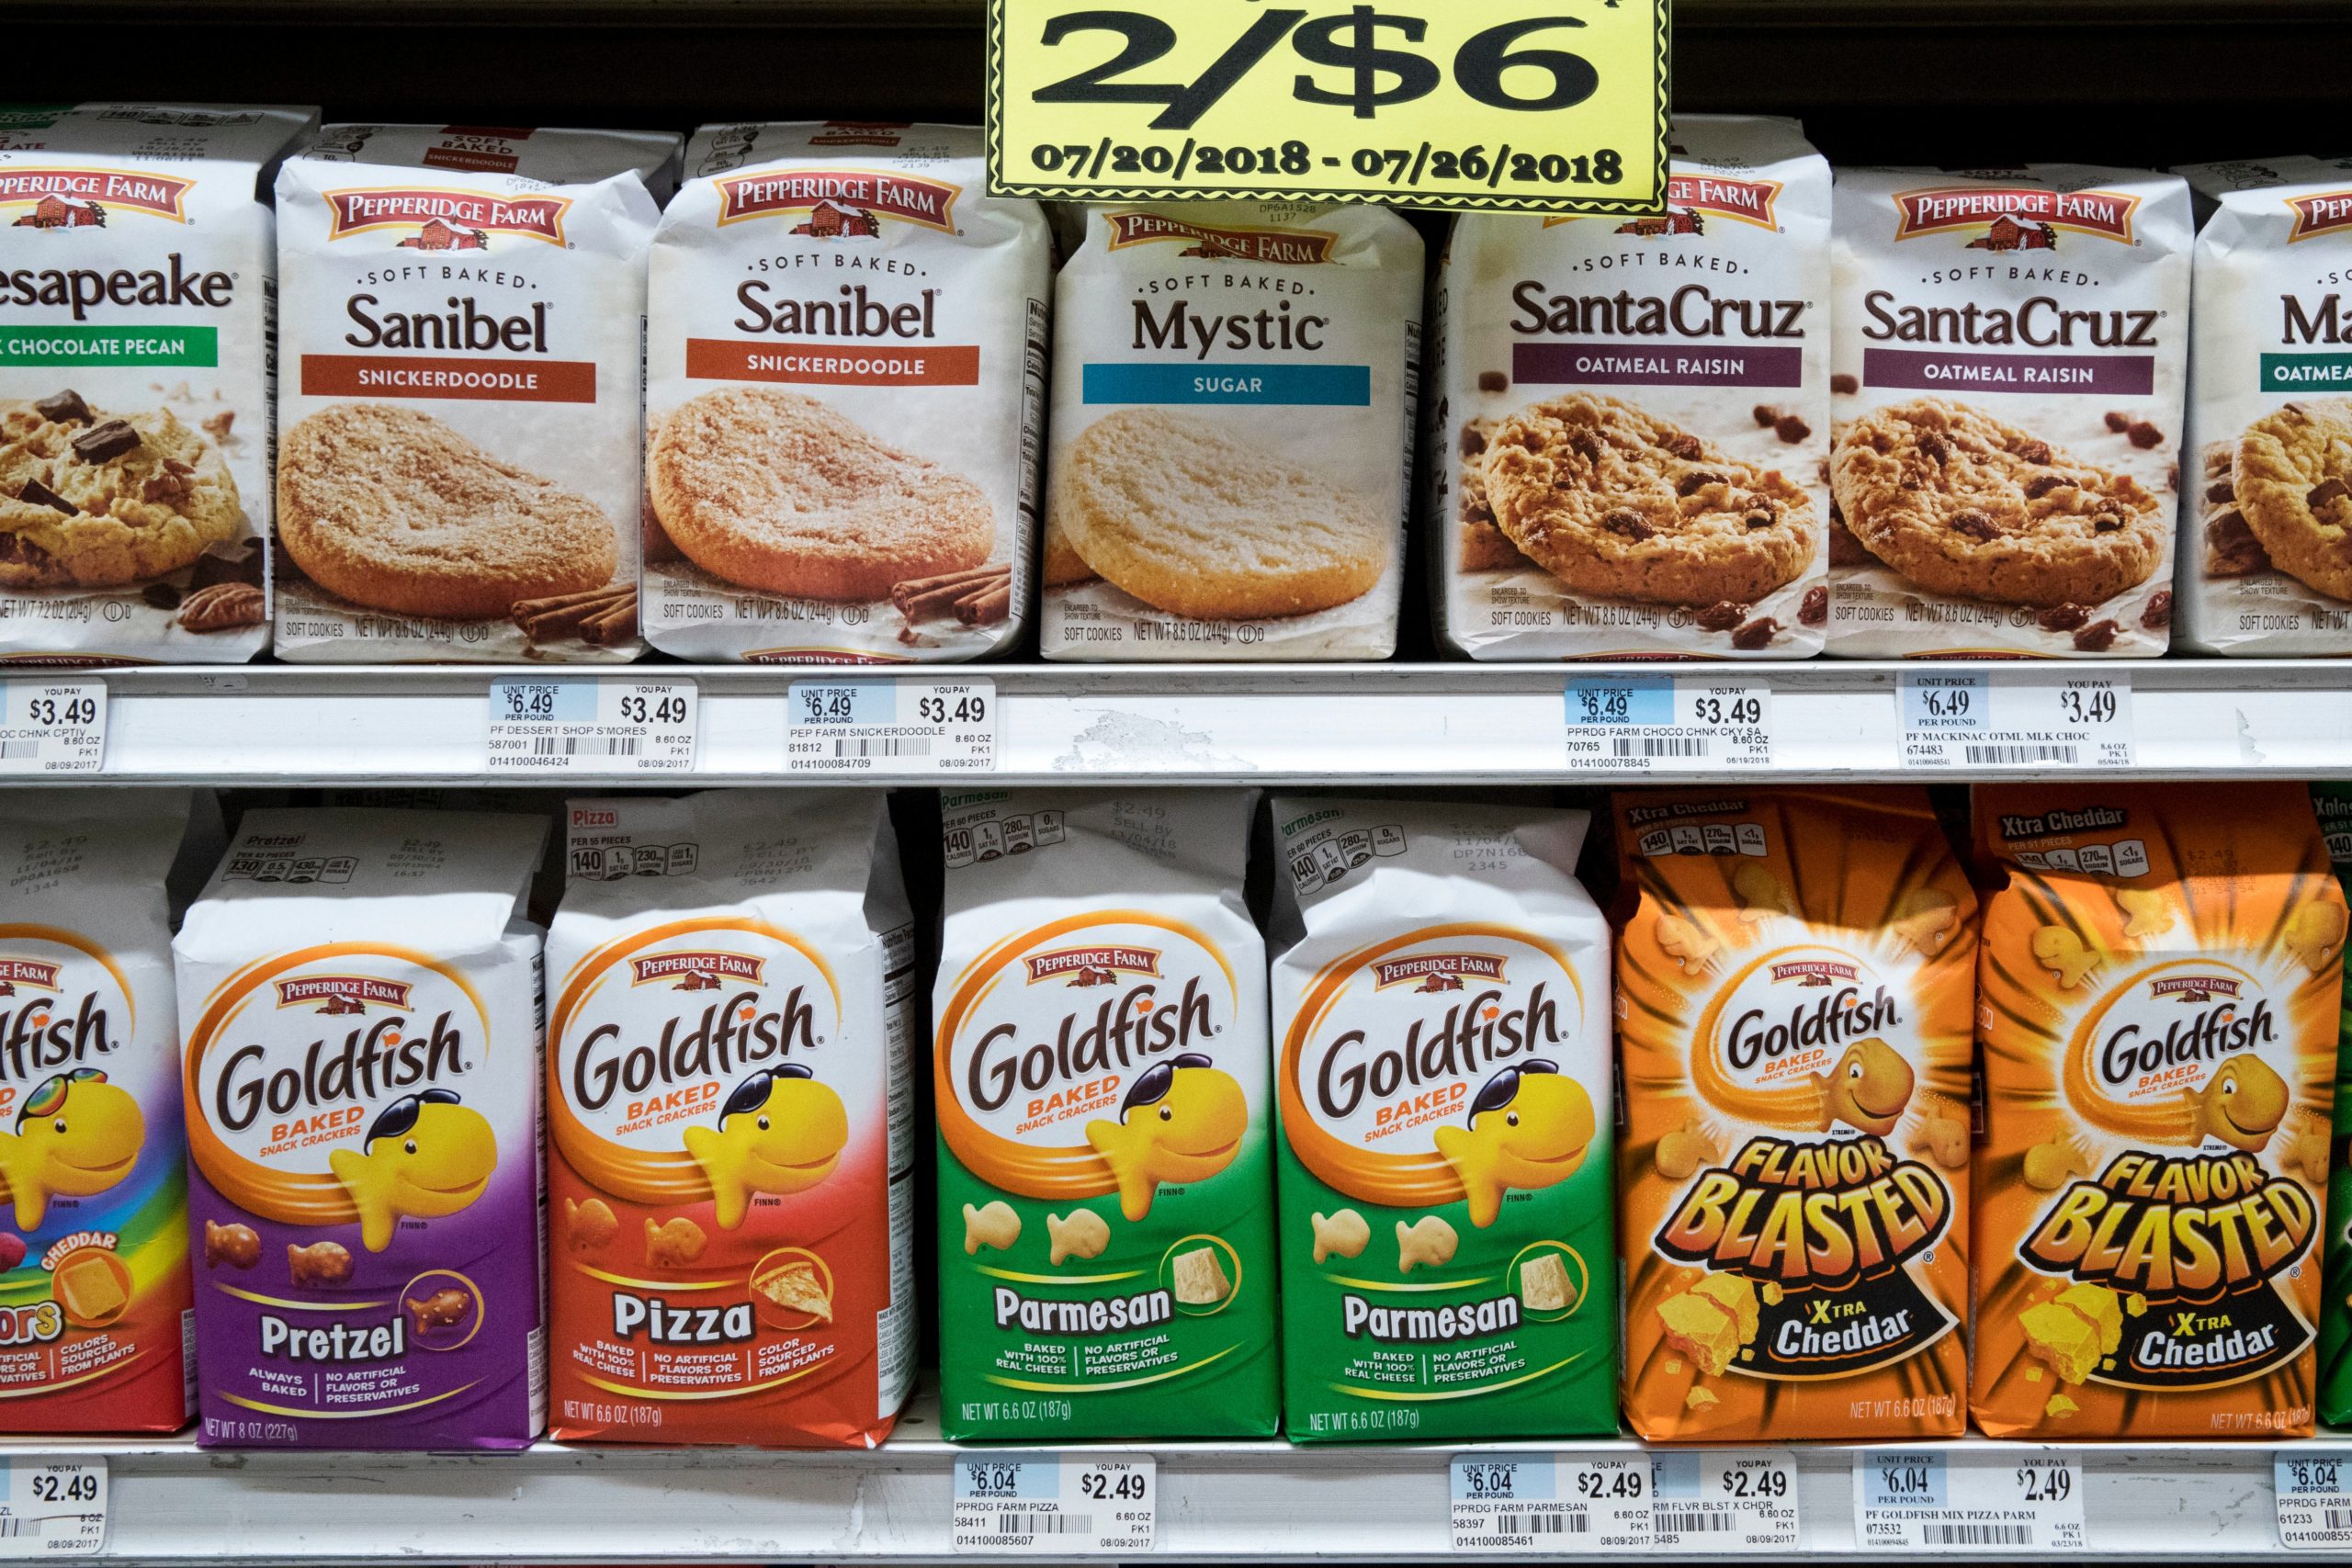 Pepperidge Farm Goldfish crackers and other items are displayed at a supermarket in the East Village neighbourhood of Manhattan, Tuesday, July 24, 2018.  (Photo: Mary Altaffer, AP)